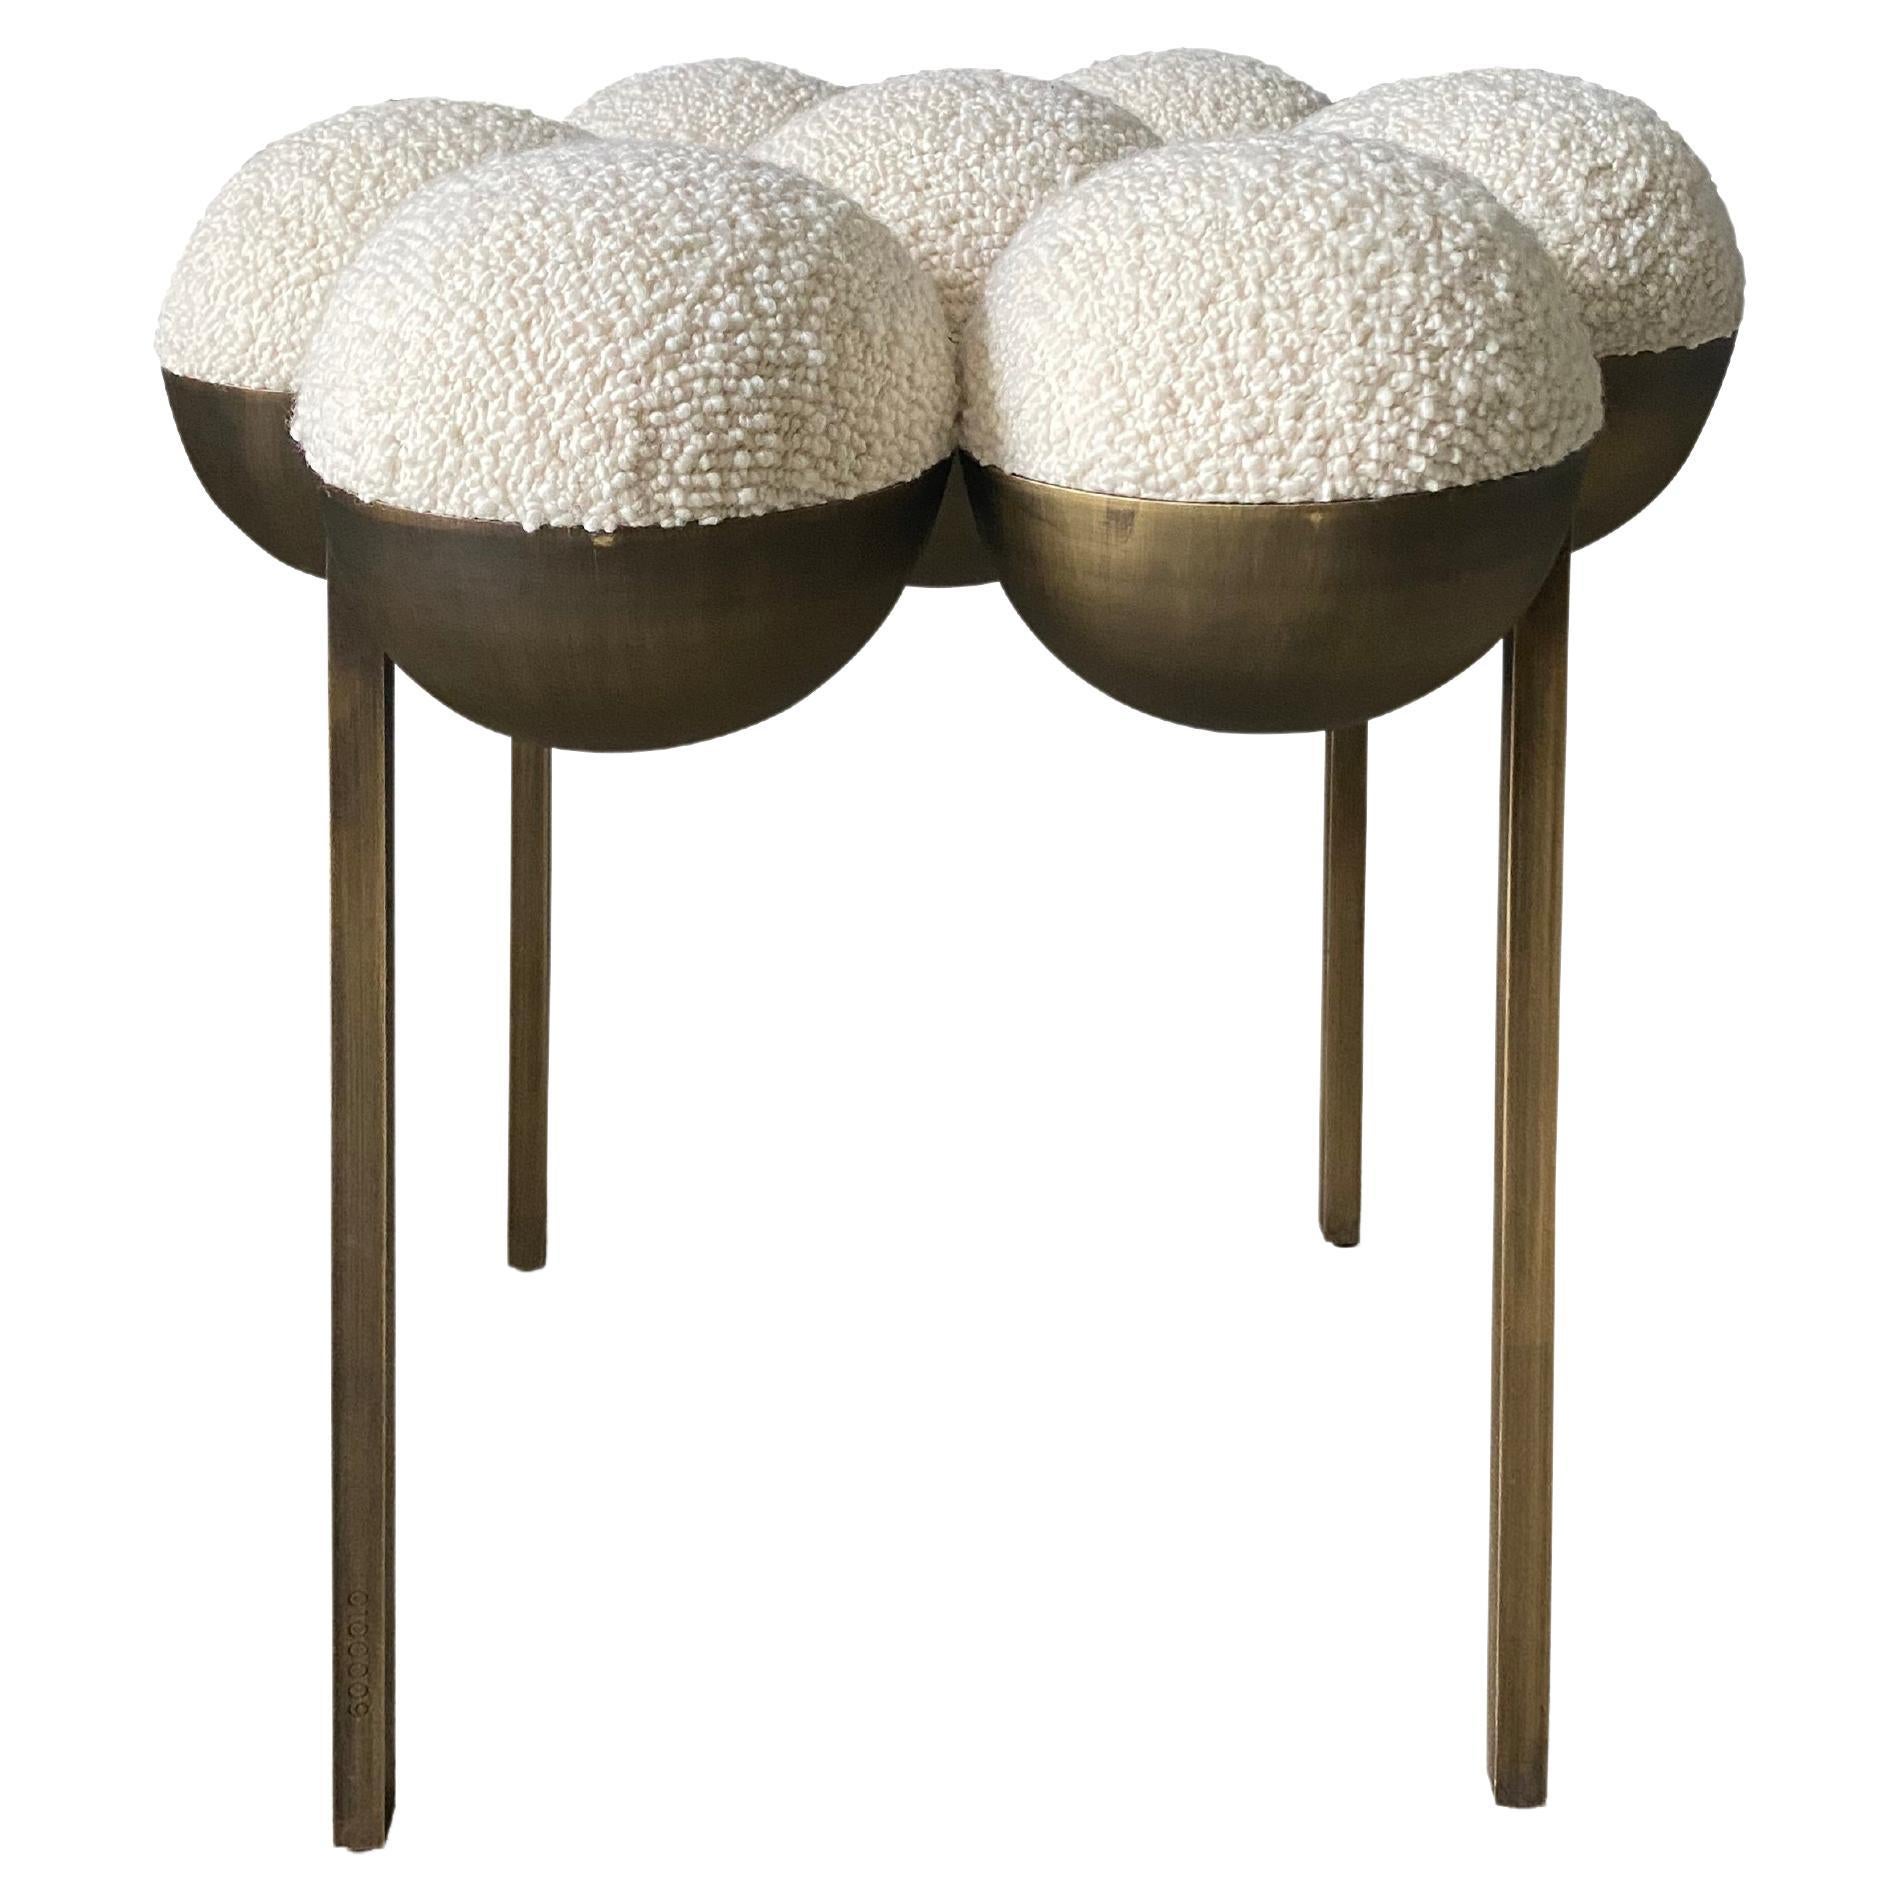 Saturn Pouffe Small, Oxidized Brass and Ivory Boucle by Lara Bohinc For Sale